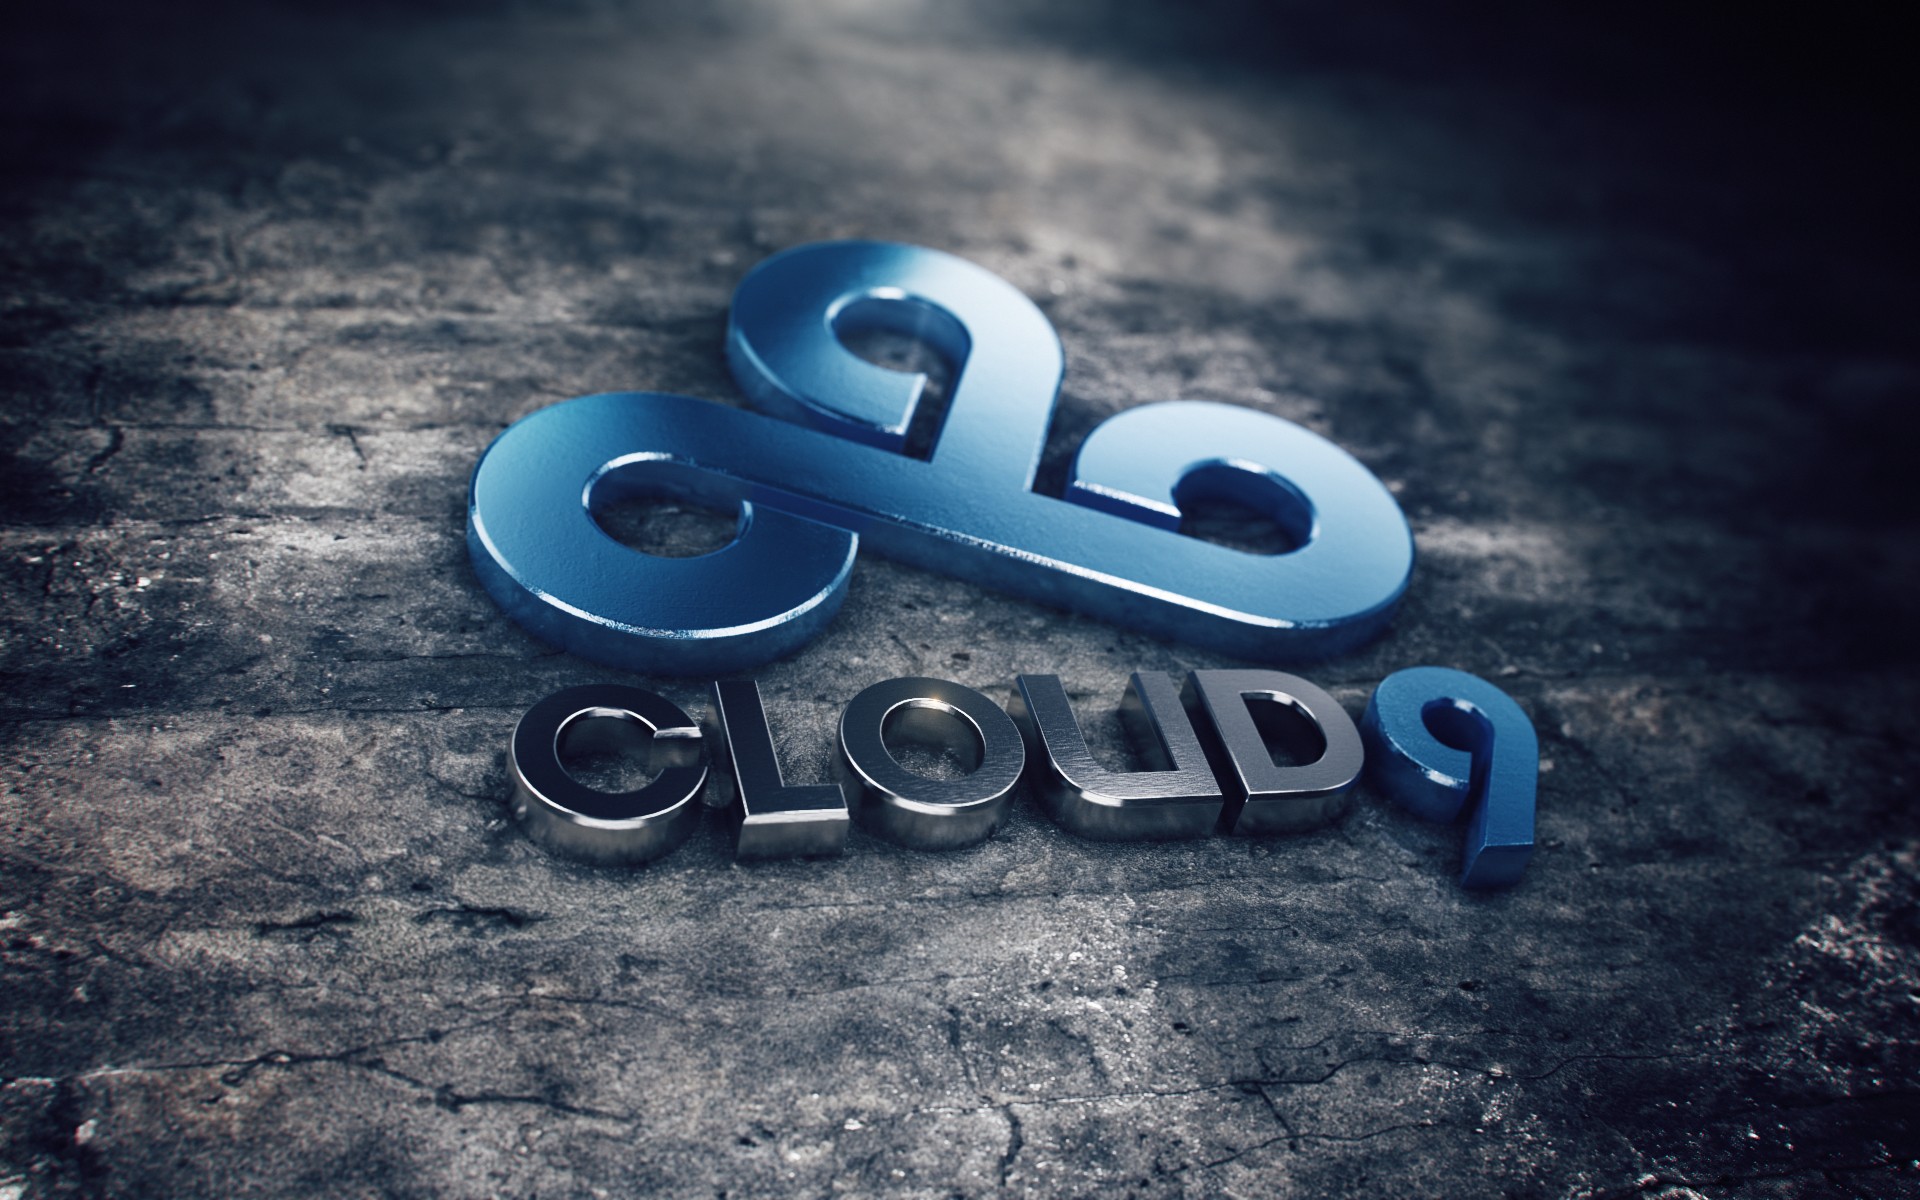 General 1920x1200 Cloud9 League of Legends Counter-Strike: Global Offensive video games PC gaming